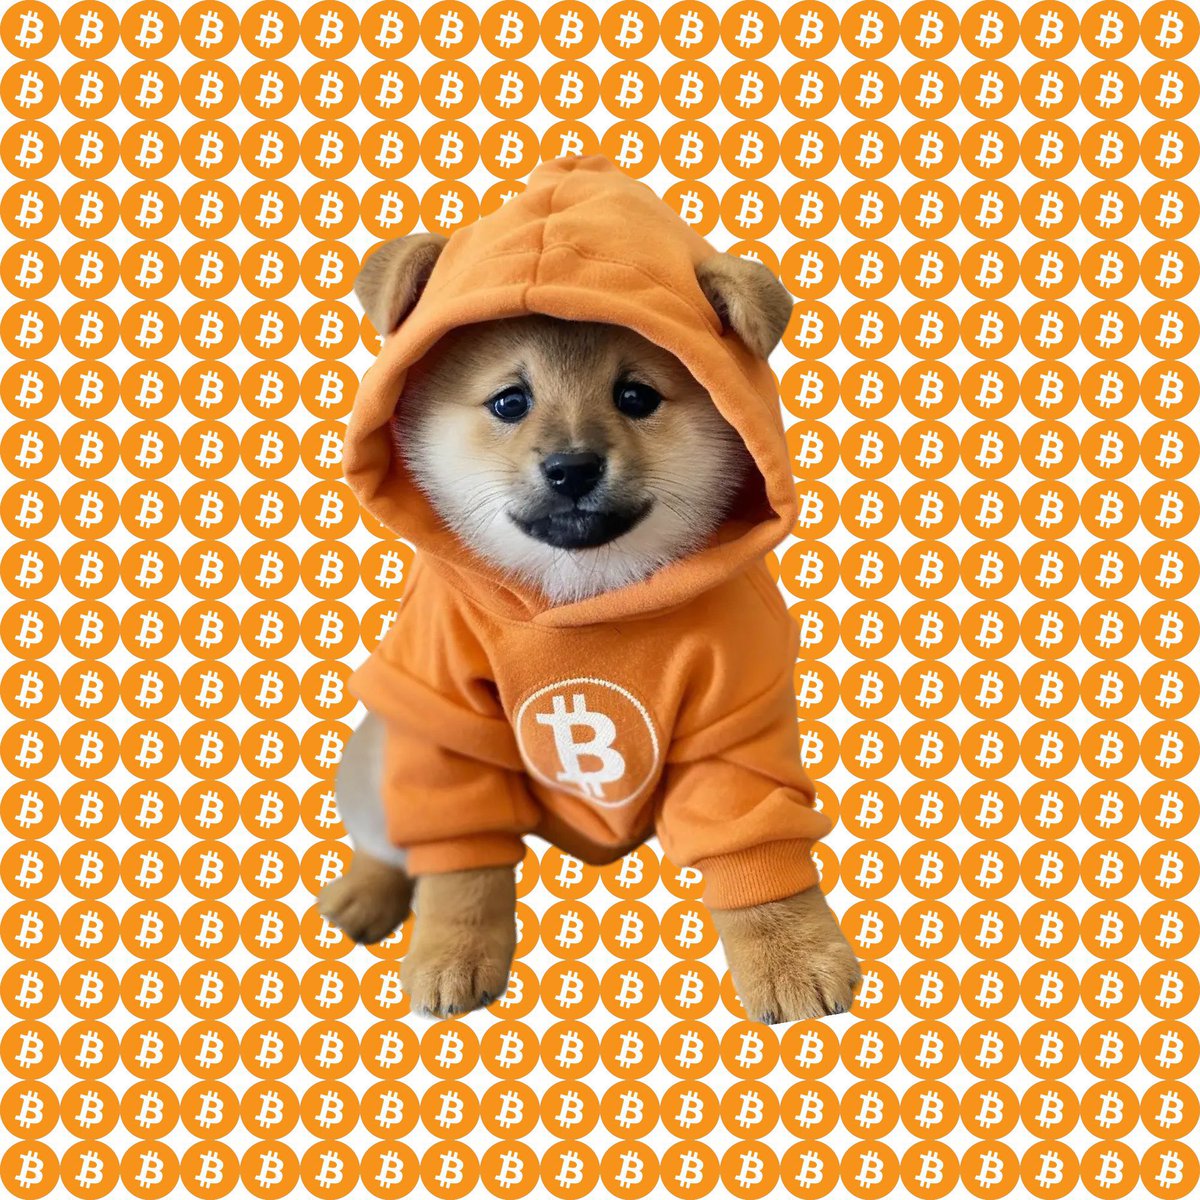 DOG•GO•TO•THE•MOON GIVEAWAY! Prize: 25.000 $DOG 🐕 To Join: 1. Follow @runes_ga & @ordinals_ga 2. Like & RT 3. Tag 2 frens Winner will be announced in 72hrs. #Runes #Bitcoin